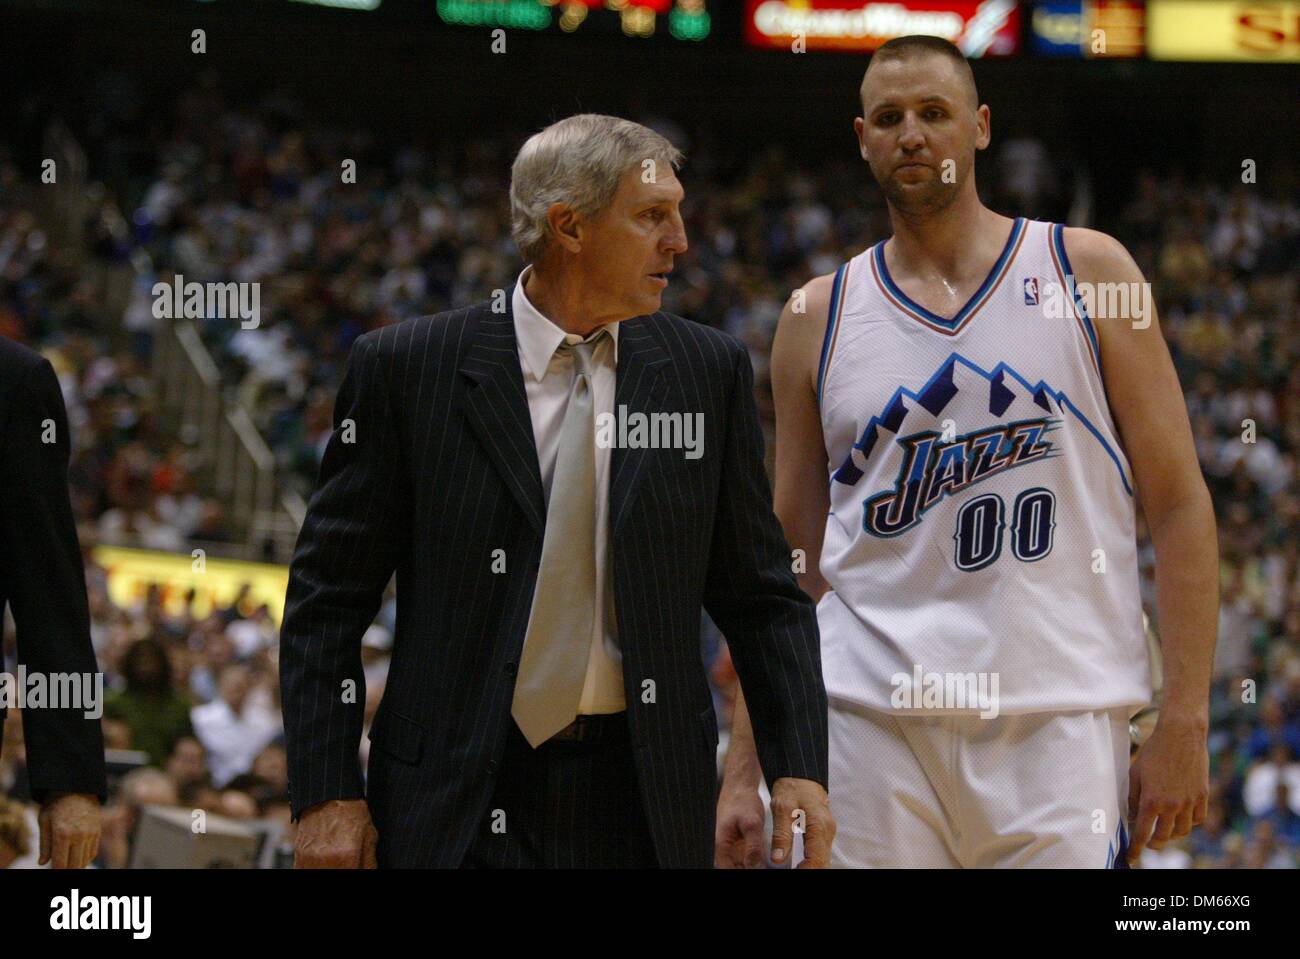 Jerry Sloan is escourted off the court by Greg Ostertag after being thrown out of the game in the third quarter of game 3 in the Western conference Playoffs between the Sacramednto Kings and the Utah Jazz at the Delta Center, Salt Lake City, Utah, Saturday, April 26, 2003. Sacramento Bee photograph by Bryan Patrick/ZUMA Press Stock Photo